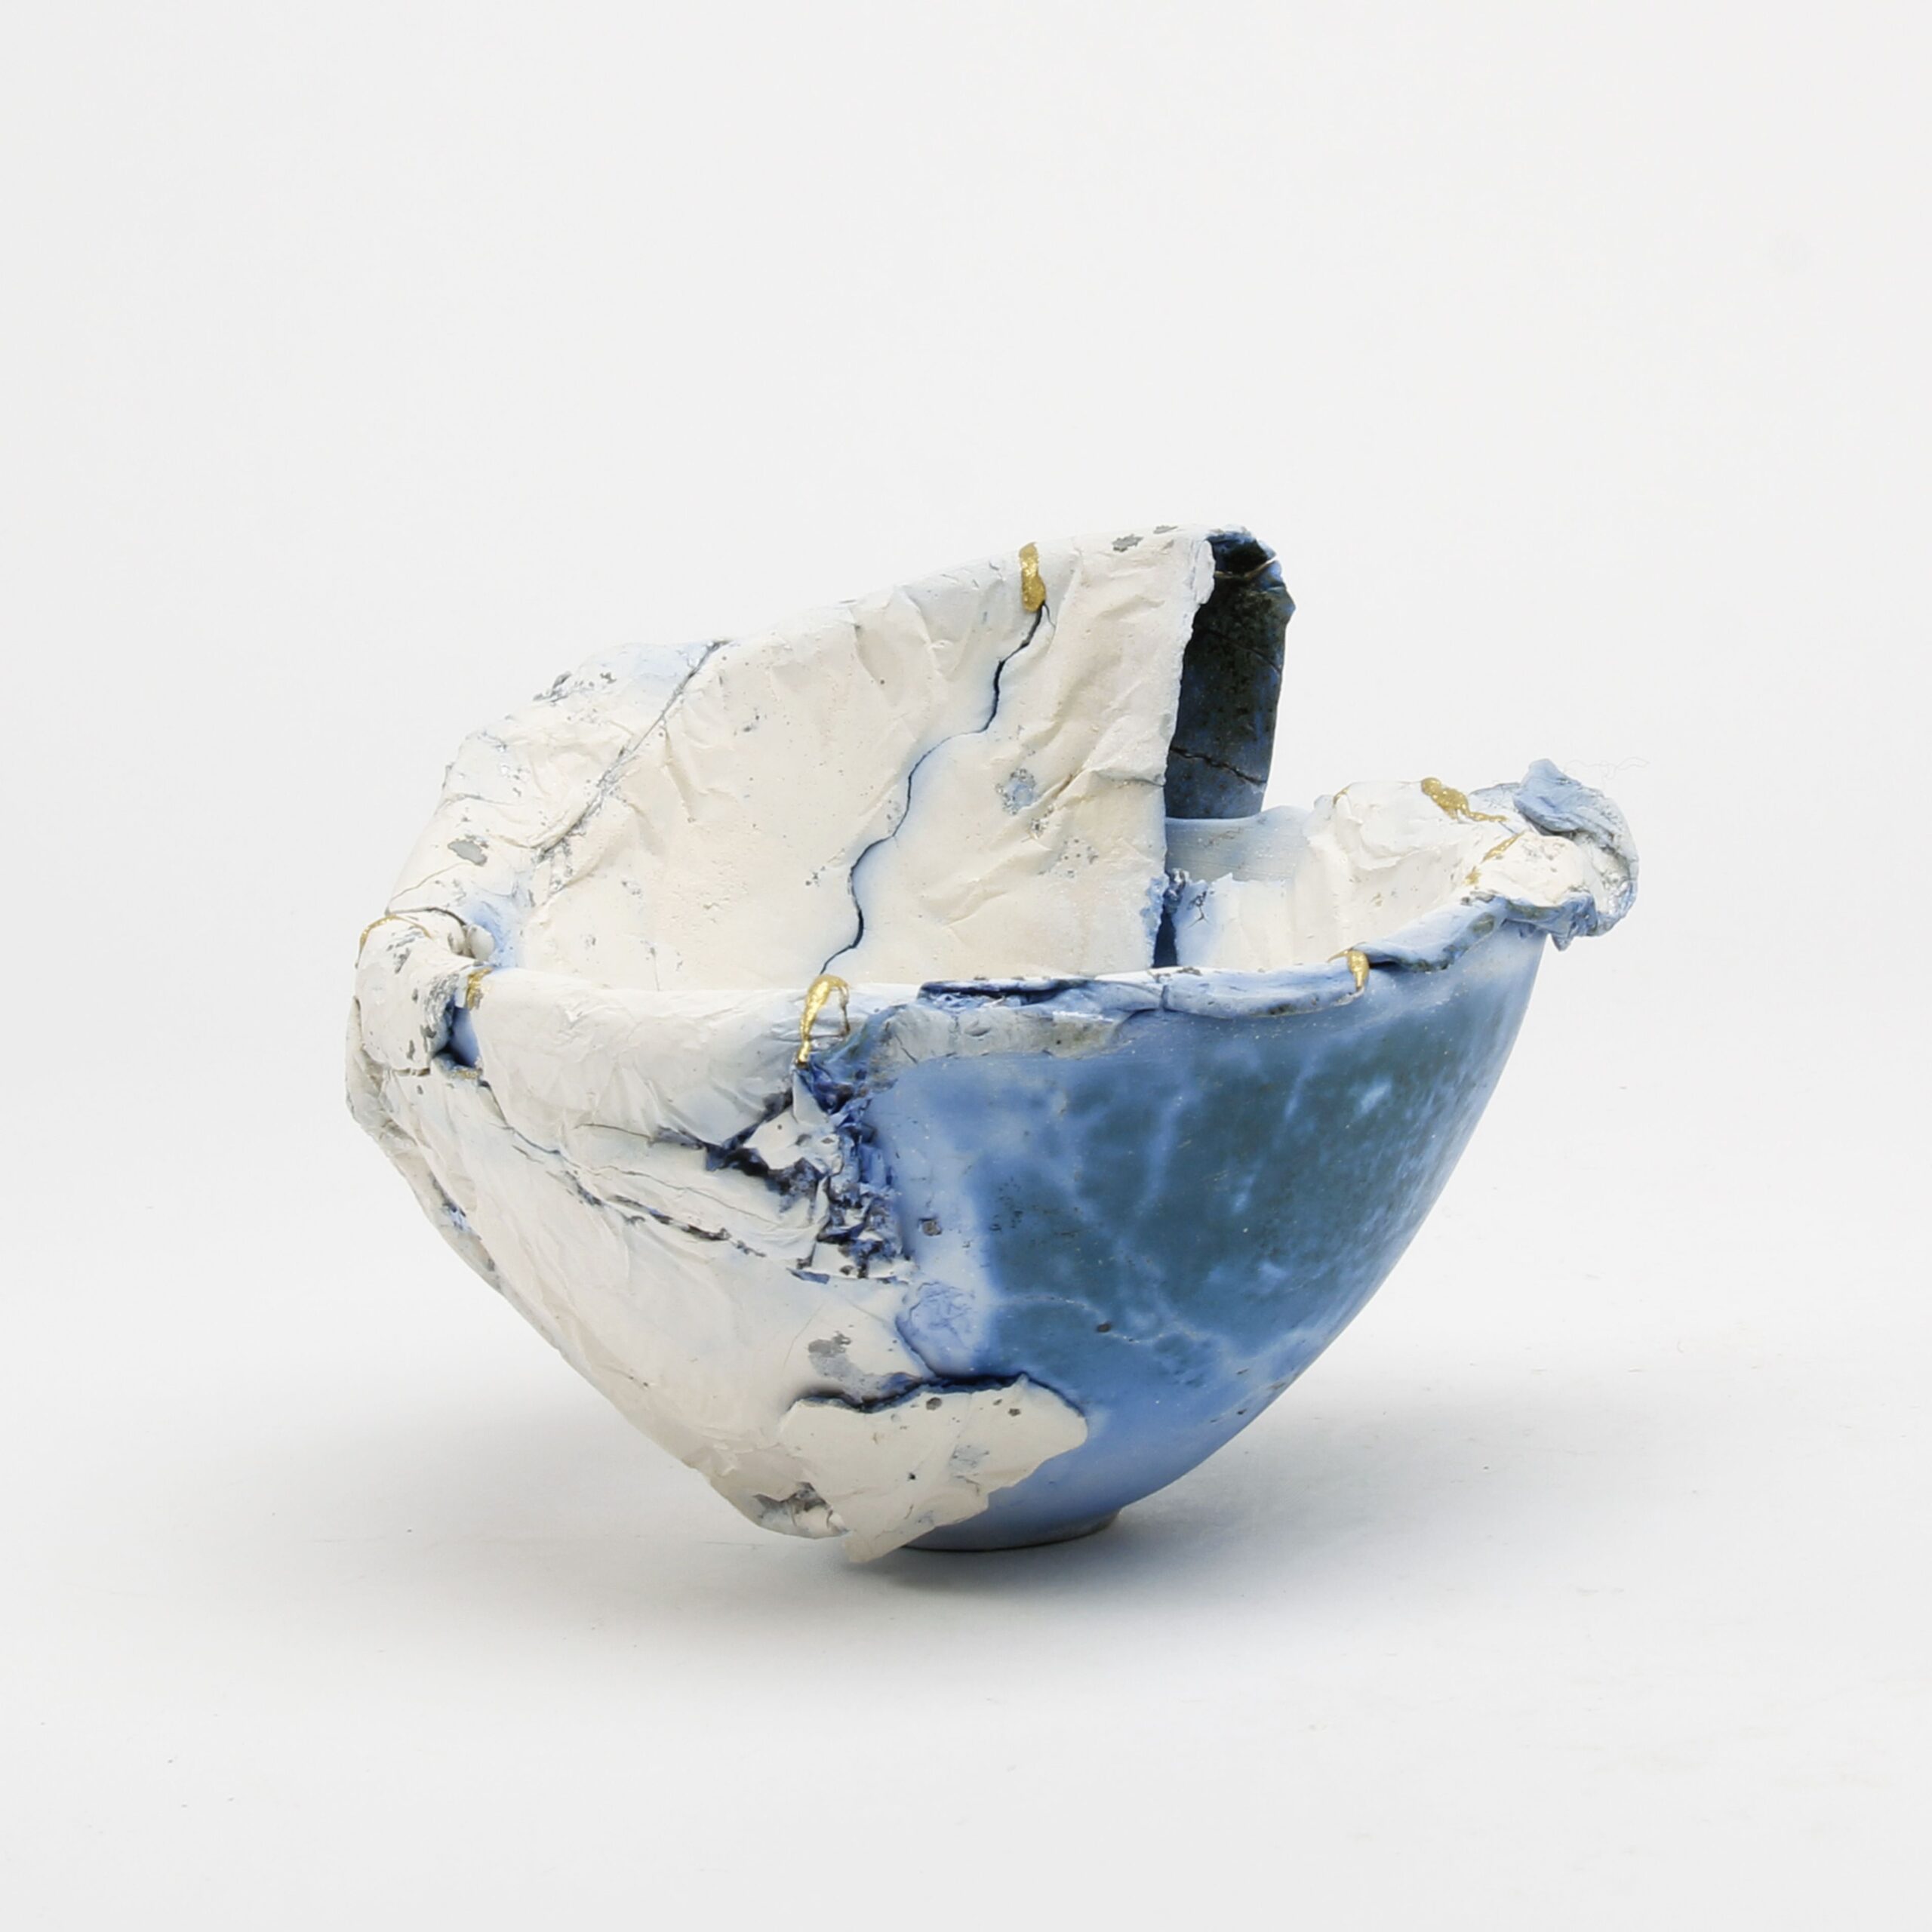 Alison Brannen: Small Sculpture Bowl Product Image 1 of 2